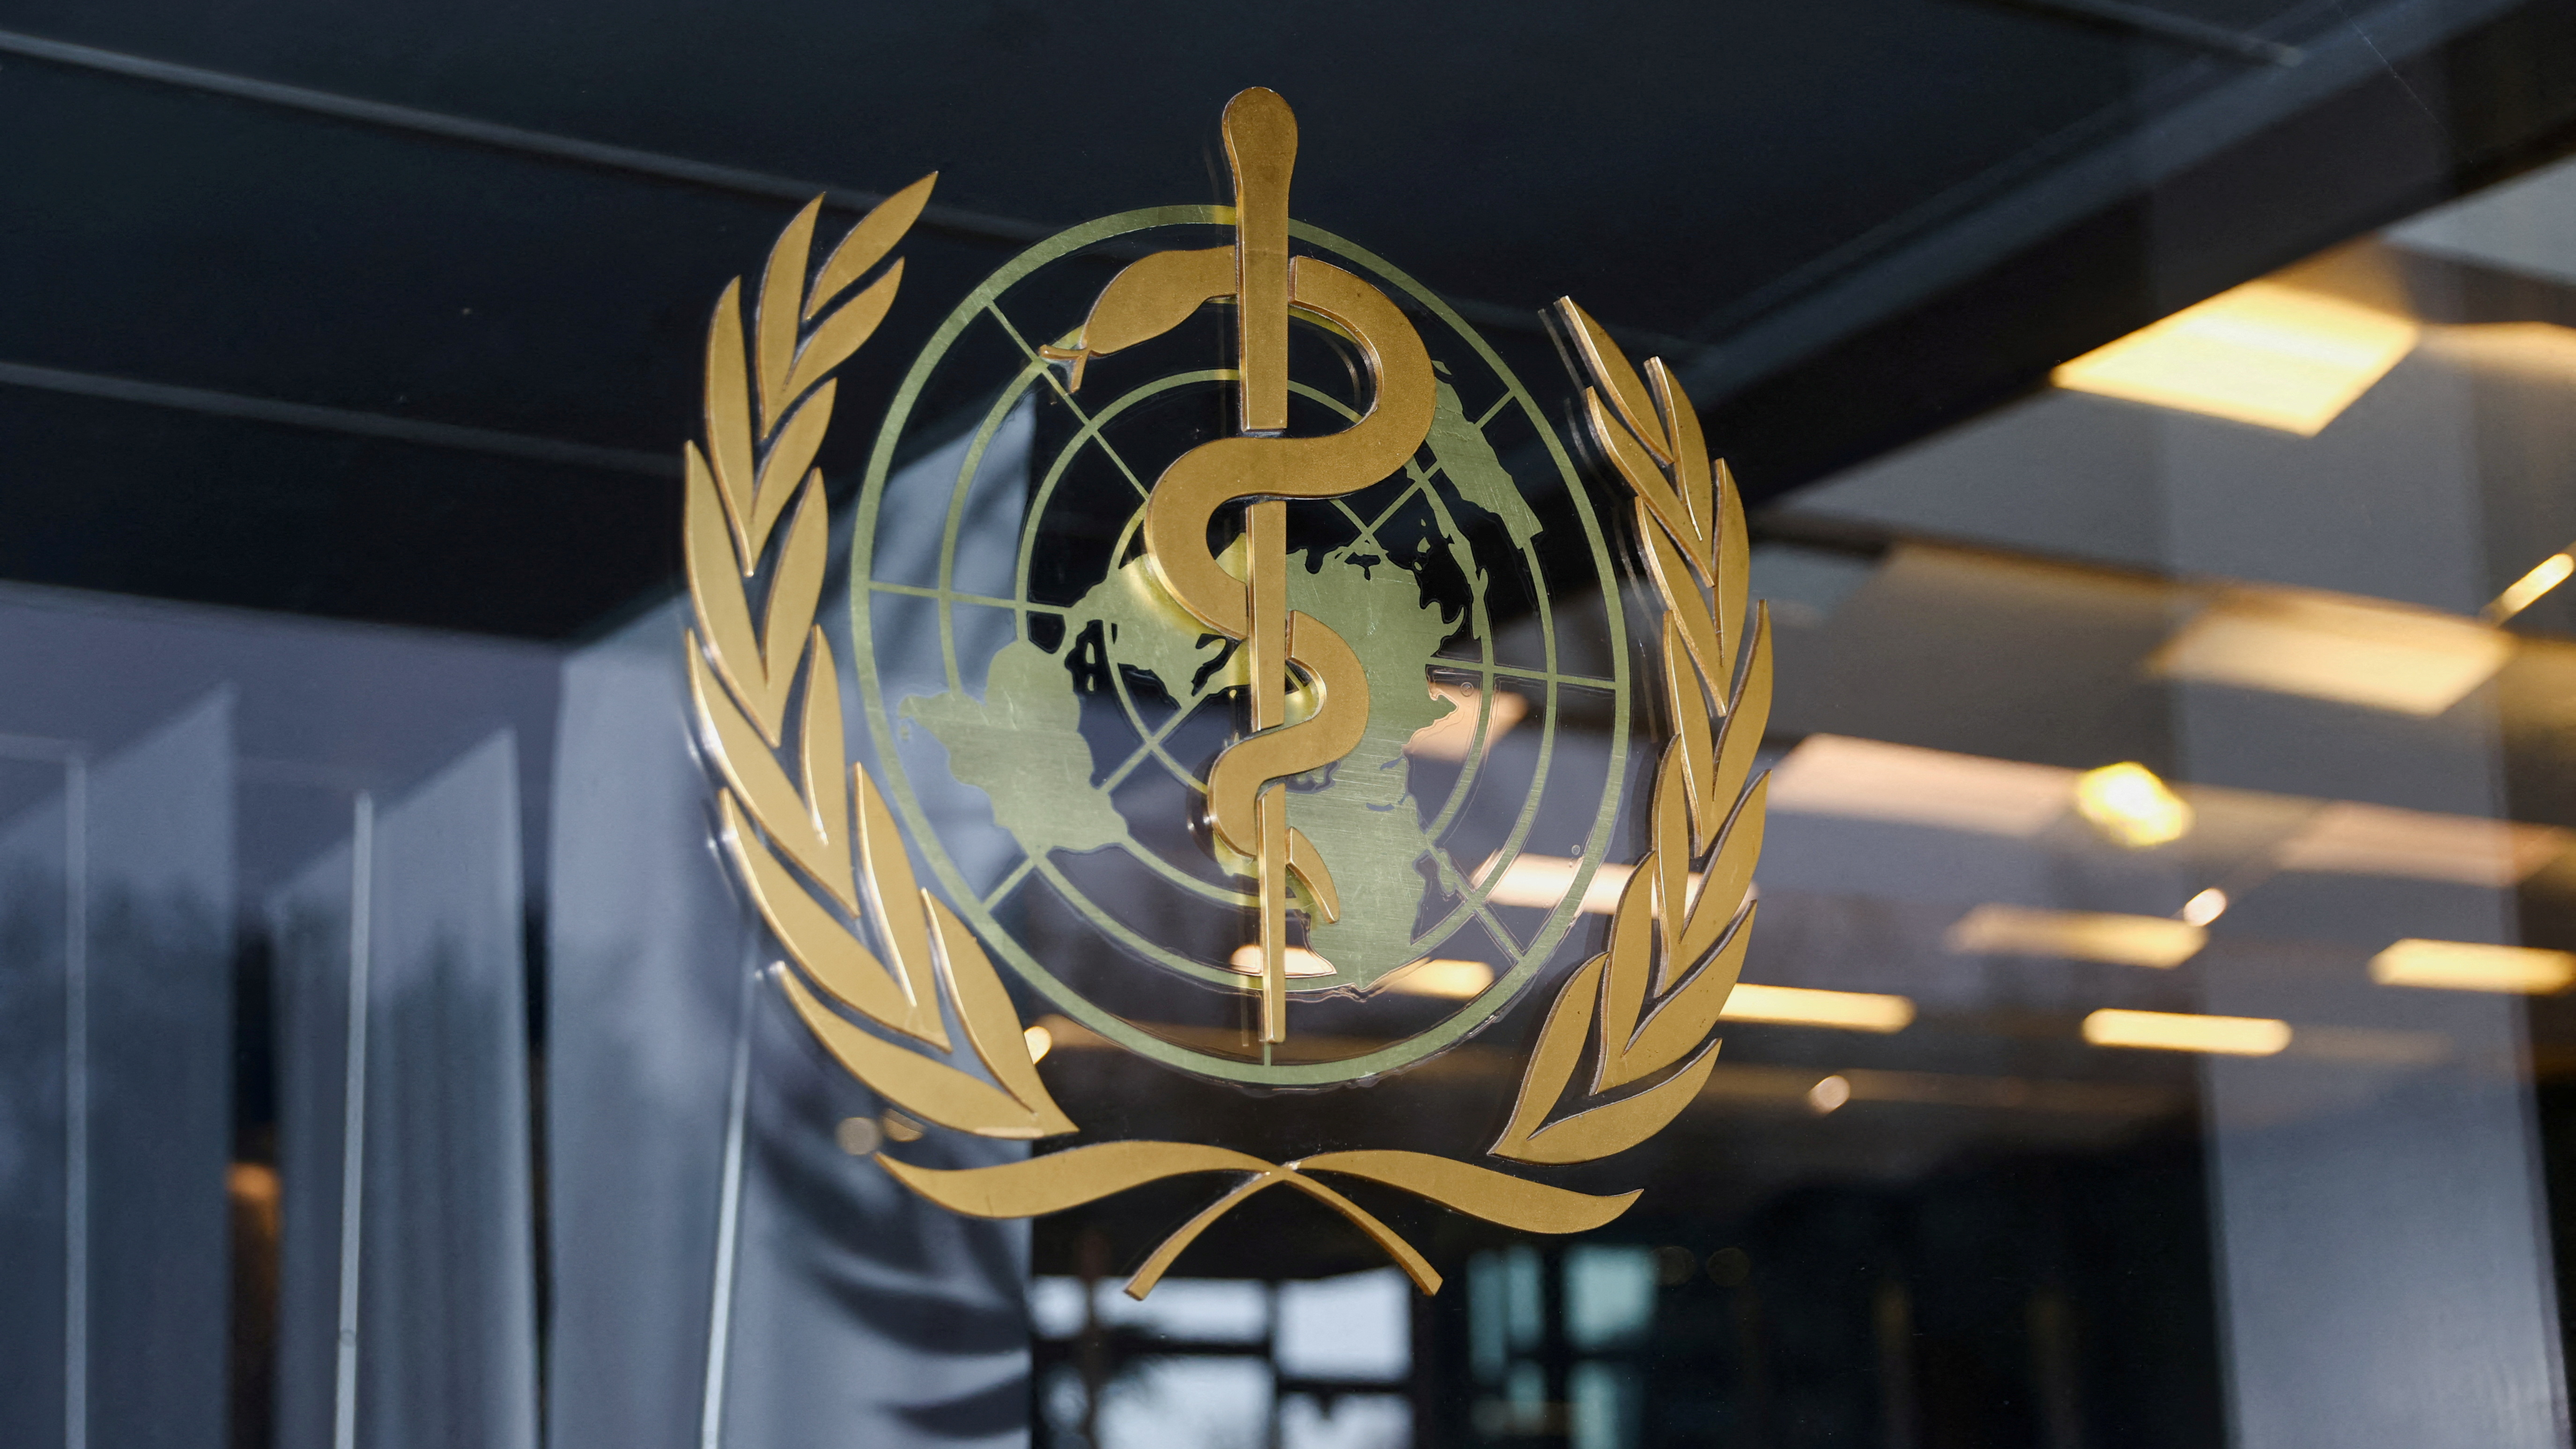 The World Health Organization has cooled concerns in Europe regarding the impact of a surge in COVID-19 cases in China. /Denis Balibouse/Reuters